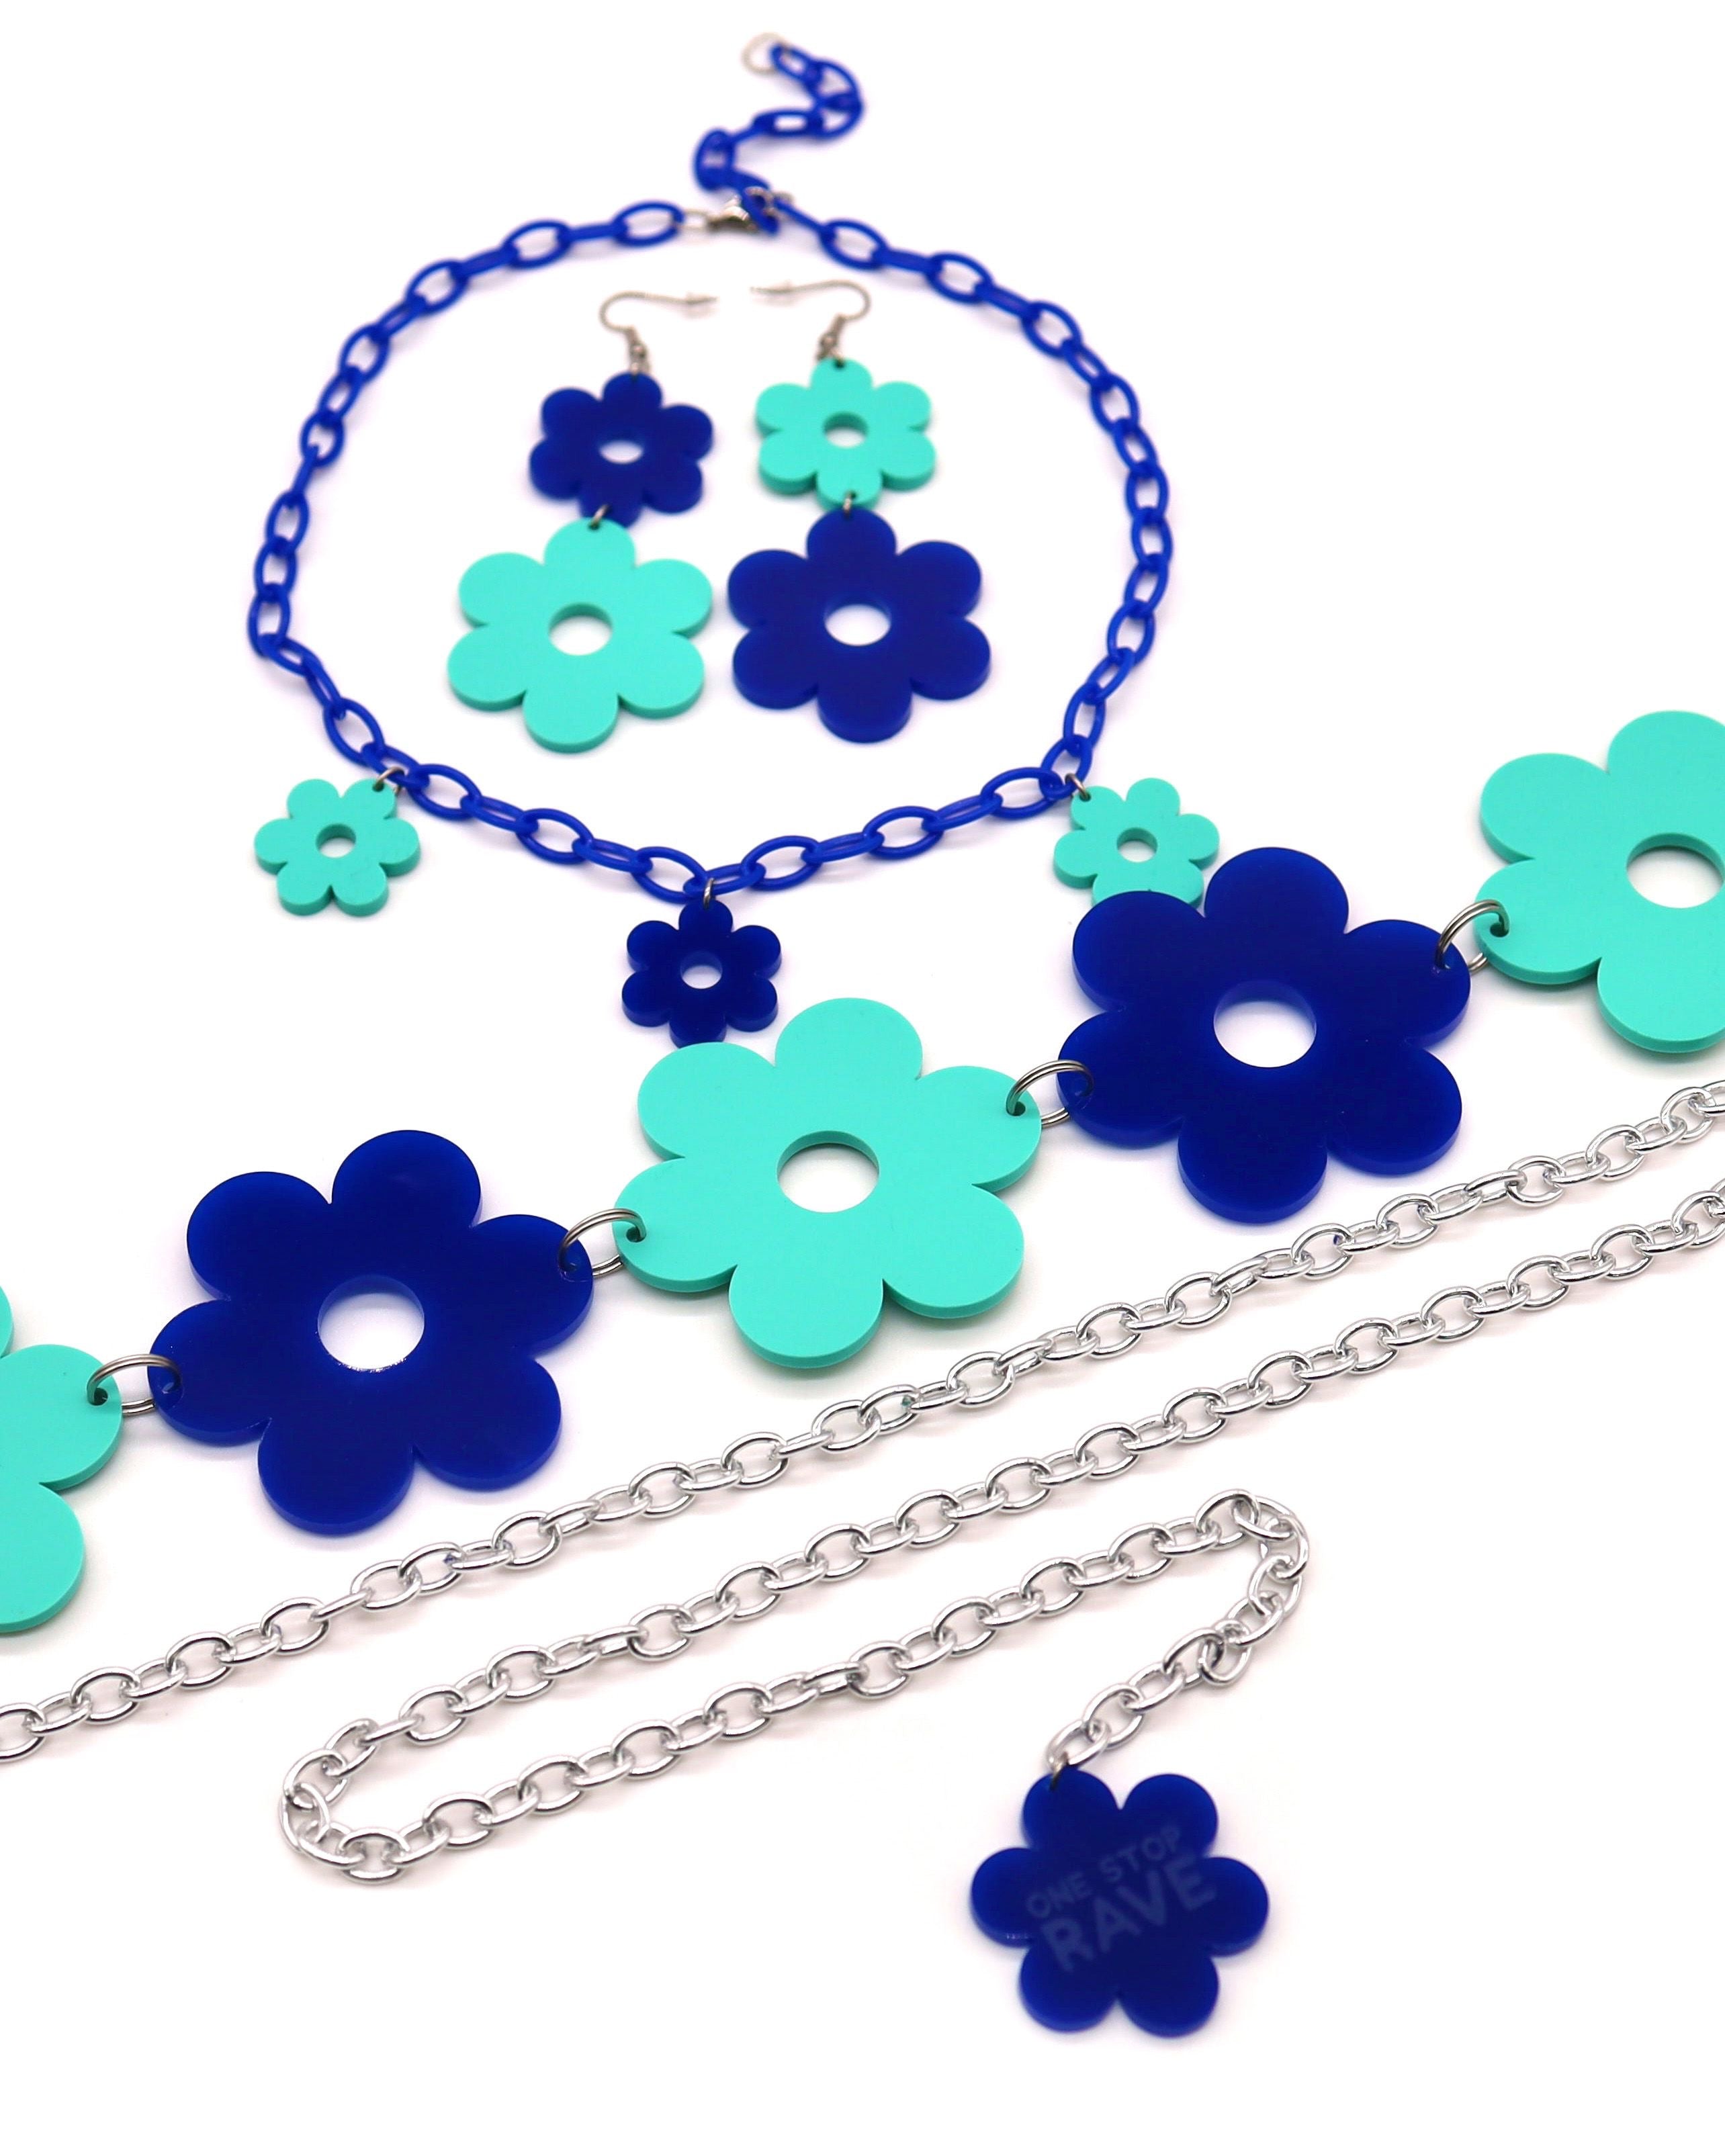 The matching Flower Power Blue set which includes the earrings, choker, and belt.